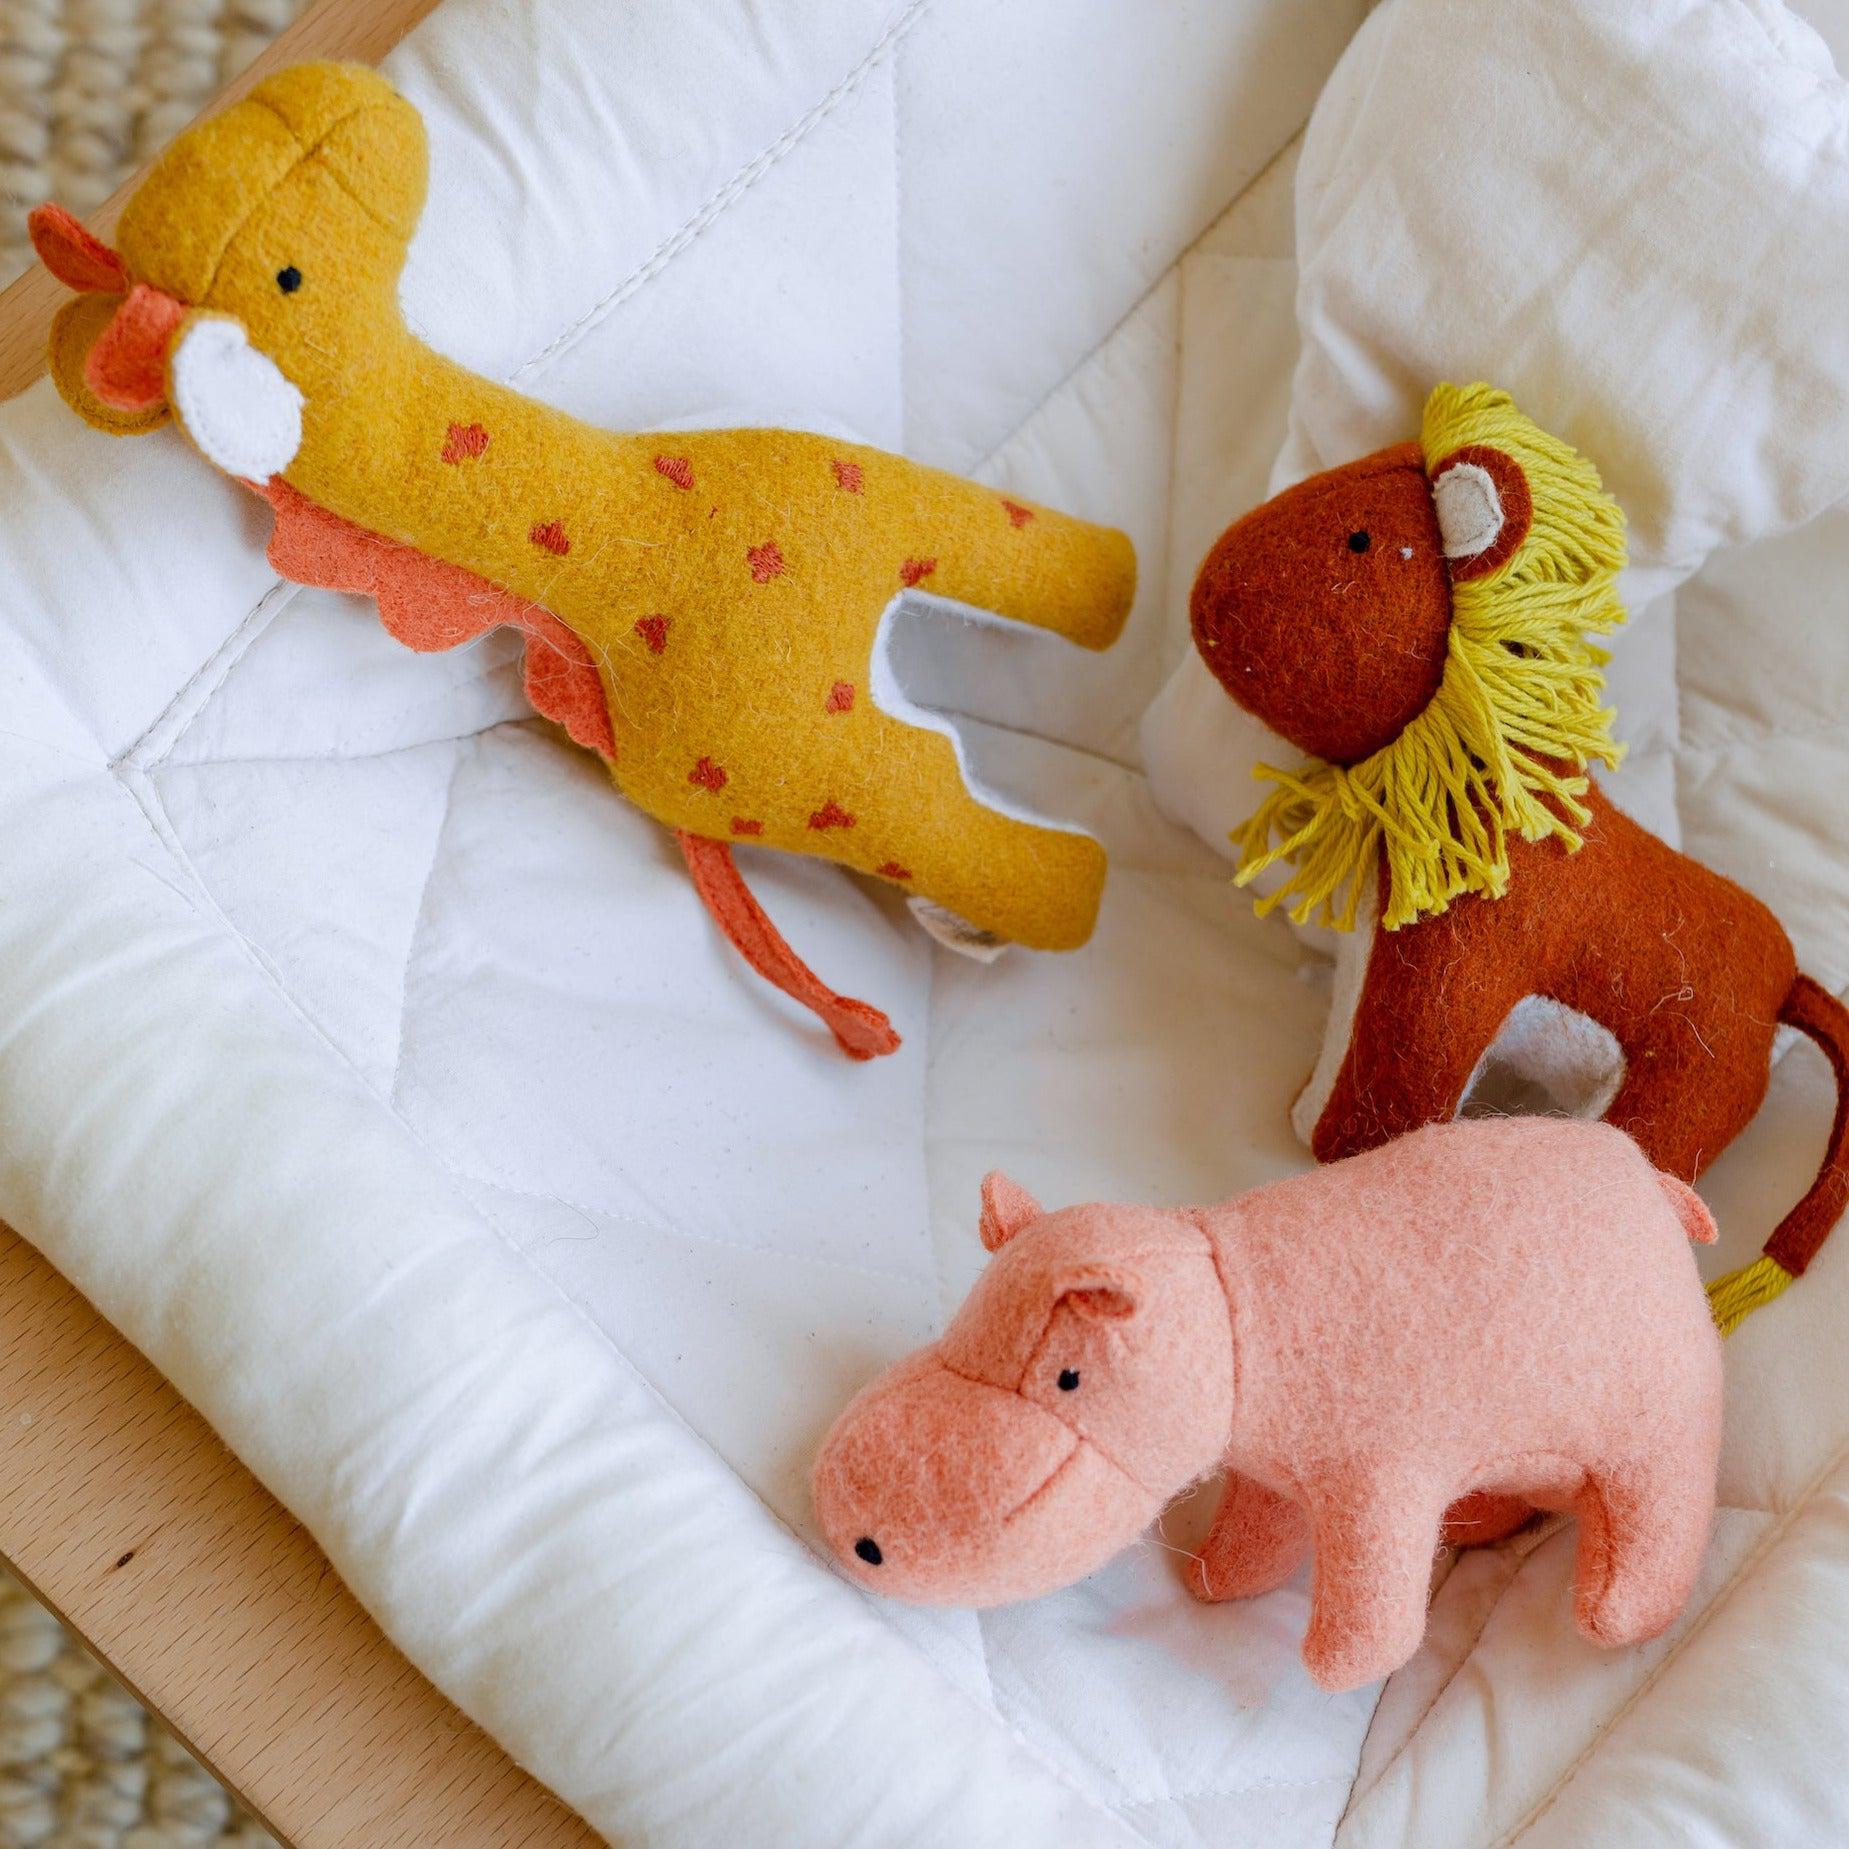 In the savannah, a Holdie Folk - Savannah Animals set from Olli Ella, consisting of a giraffe and a zebra, peacefully rests on a bed while accompanied by a hippo.